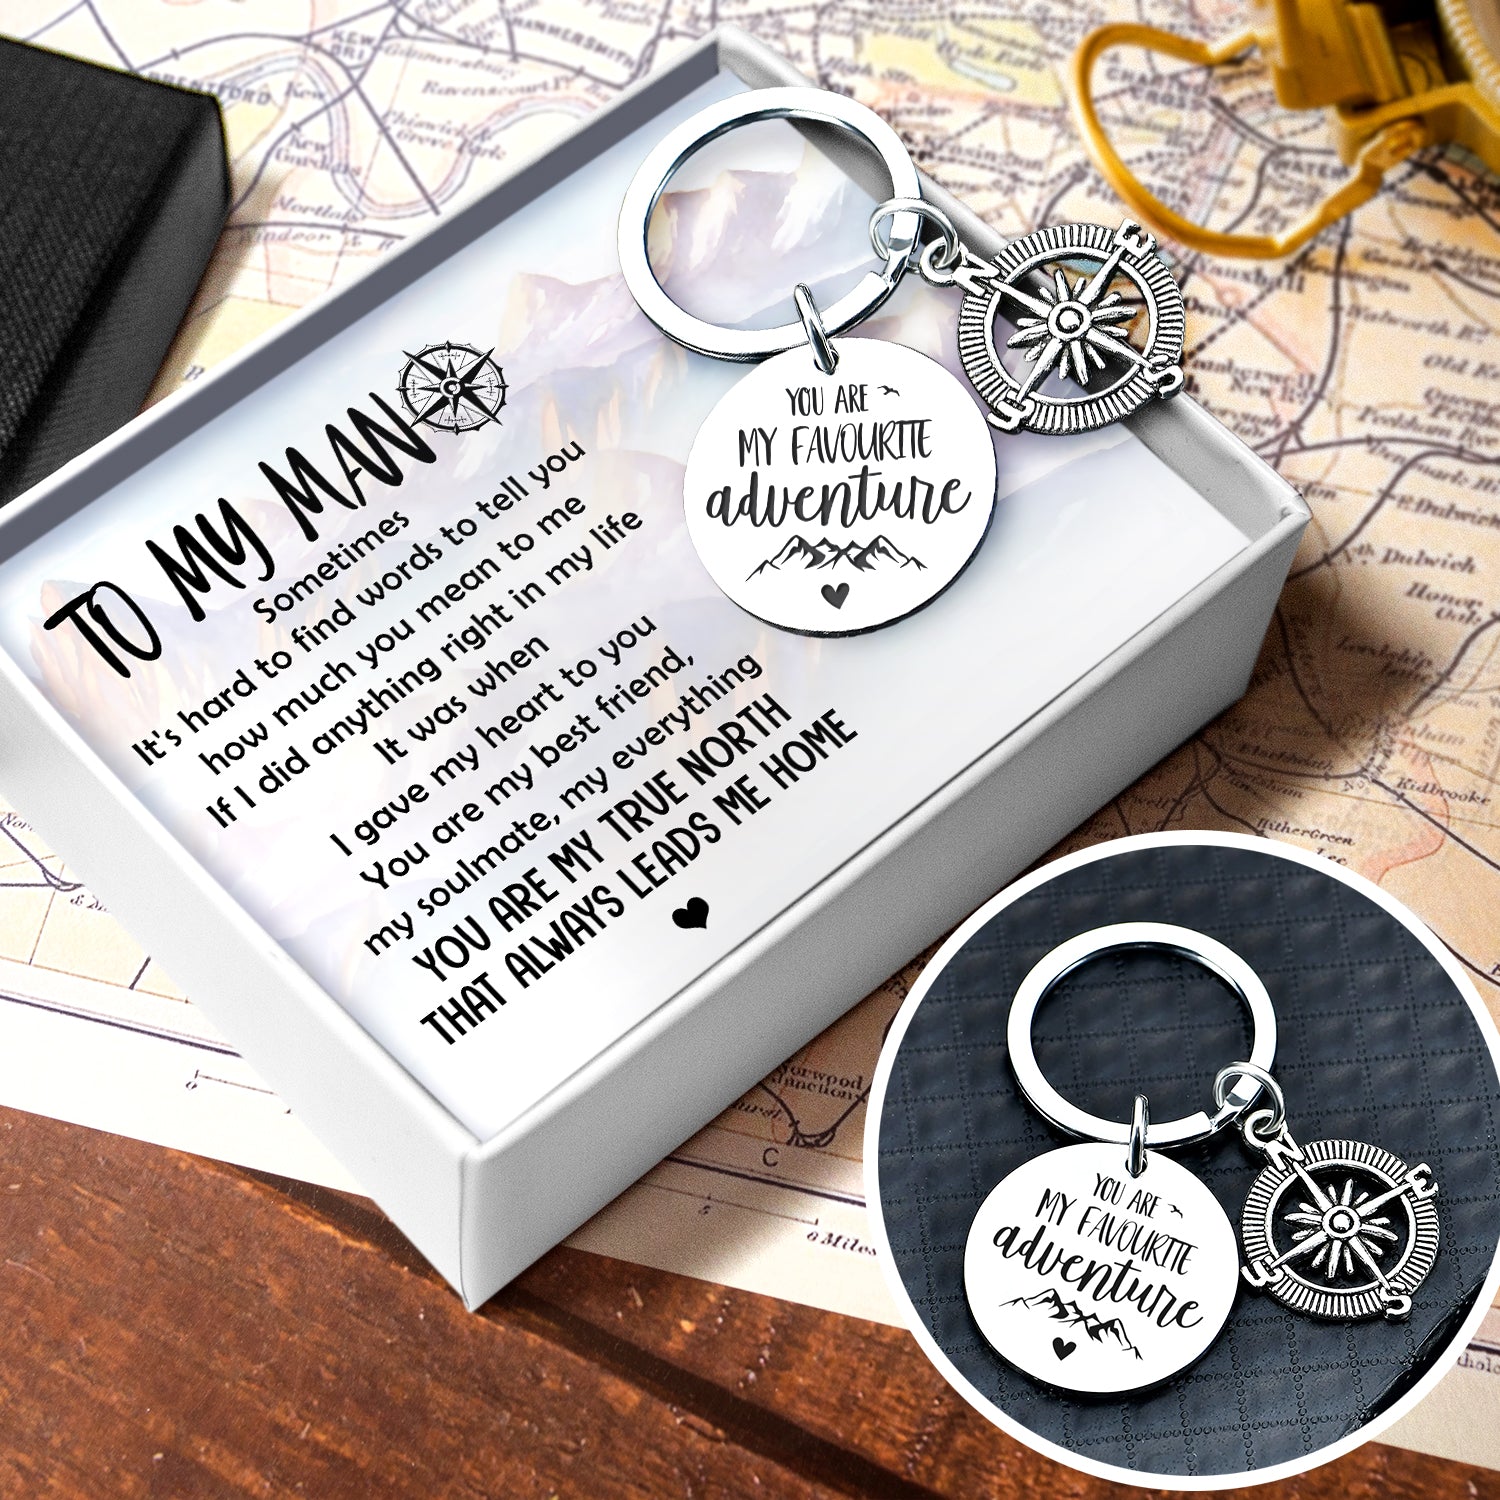 Compass Keychain - Travel - To My Man - You Are My Best Friend, My Soulmate, My Everything - Ukgkw26014